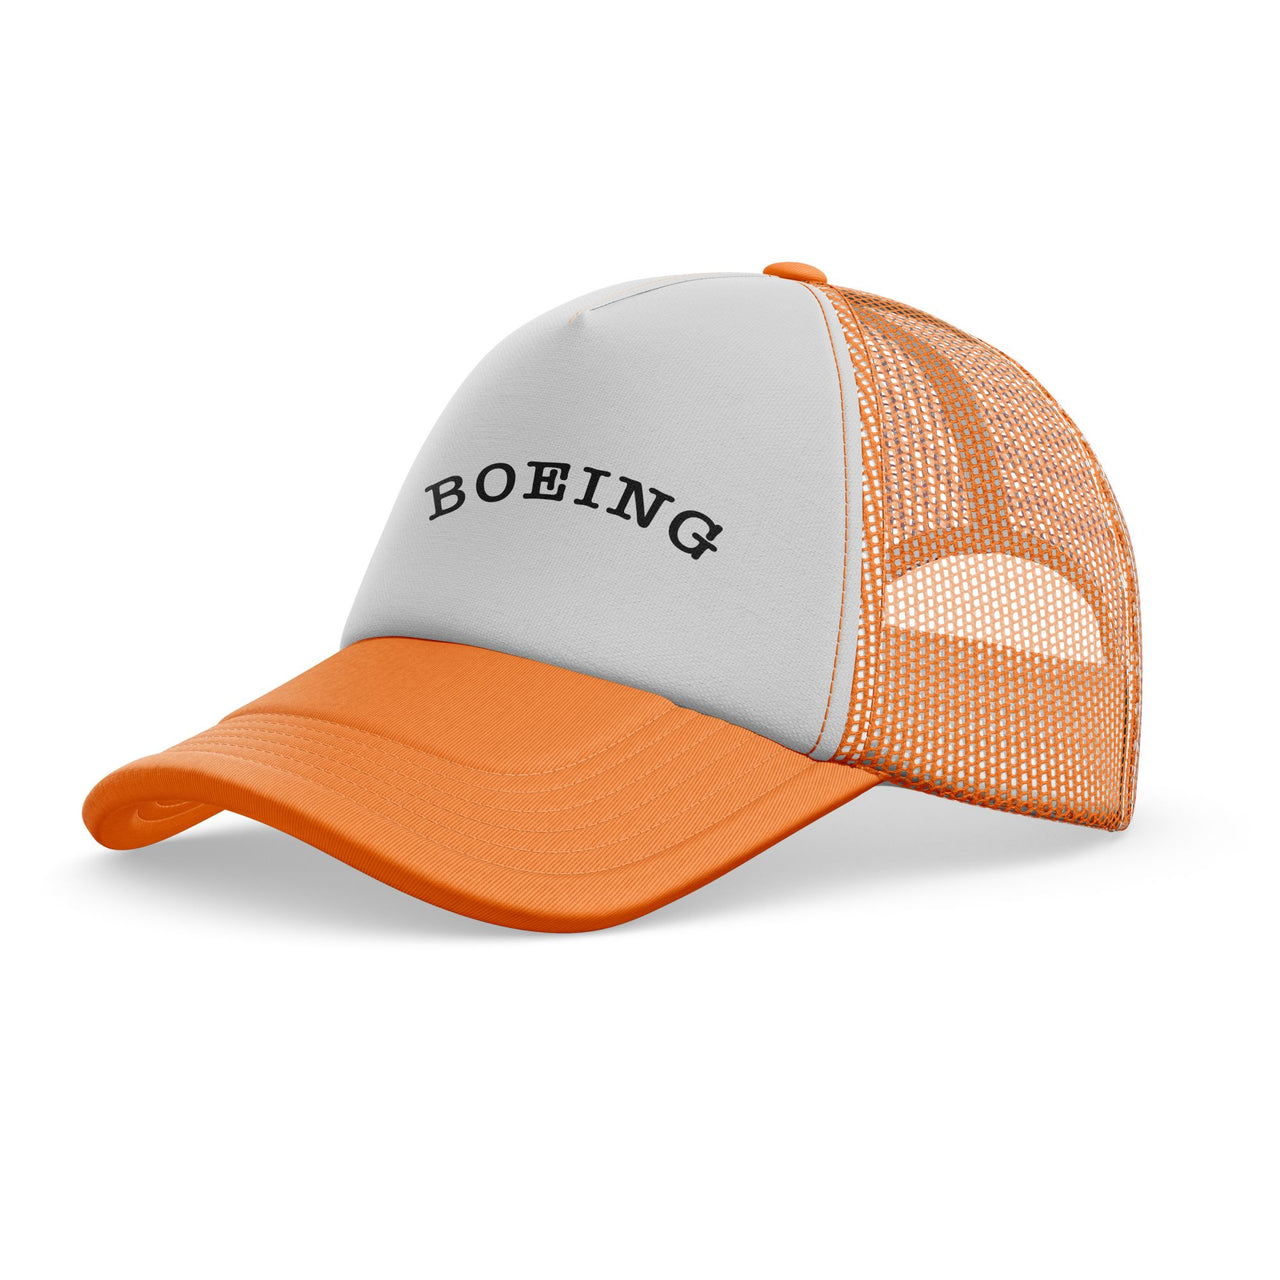 Special BOEING Text Designed Trucker Caps & Hats